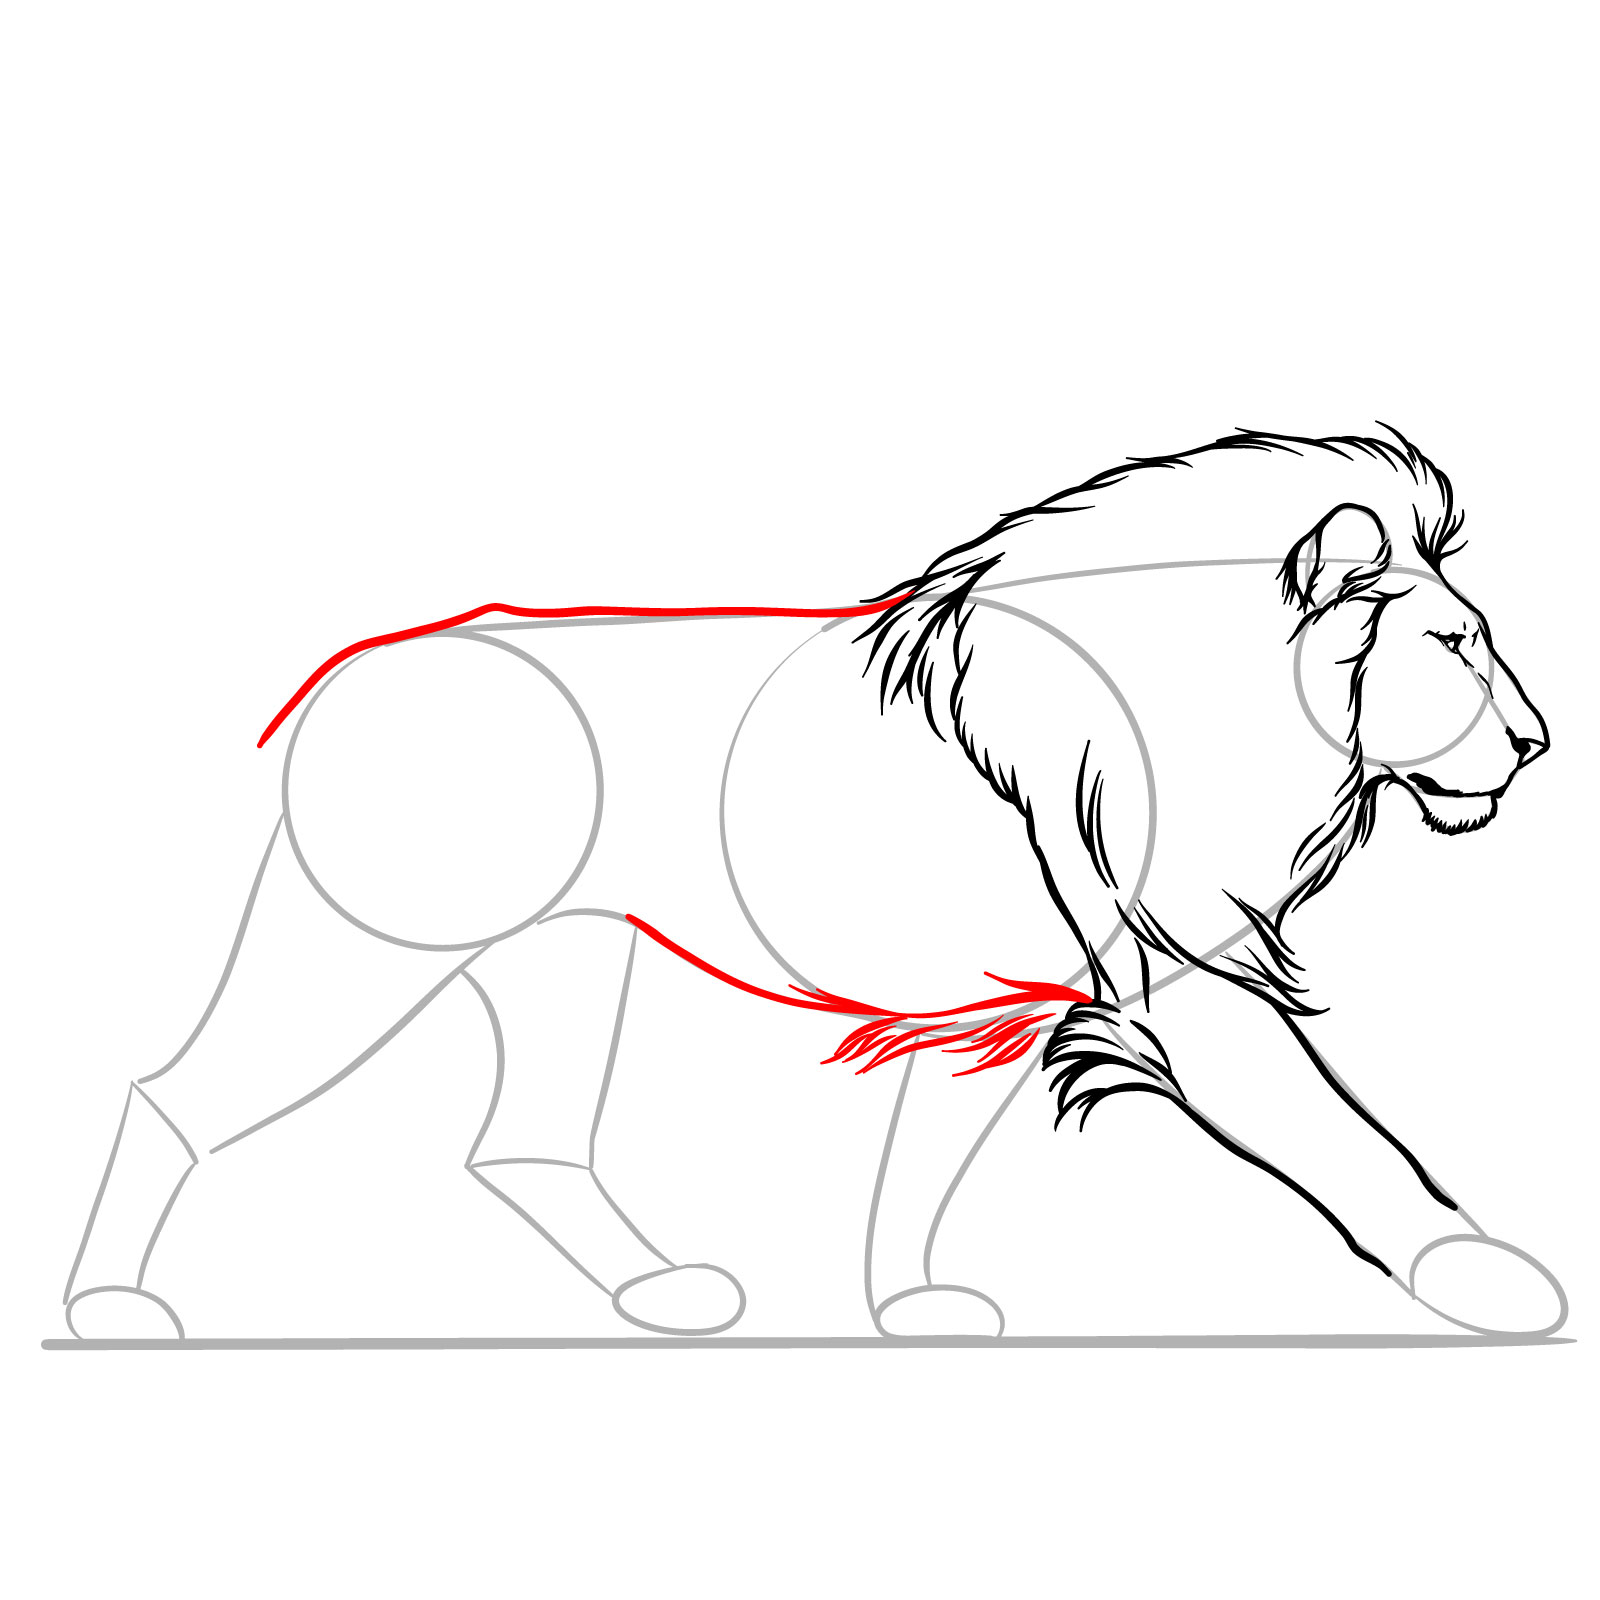 Adding the belly and back fur to a walking lion drawing - step 08